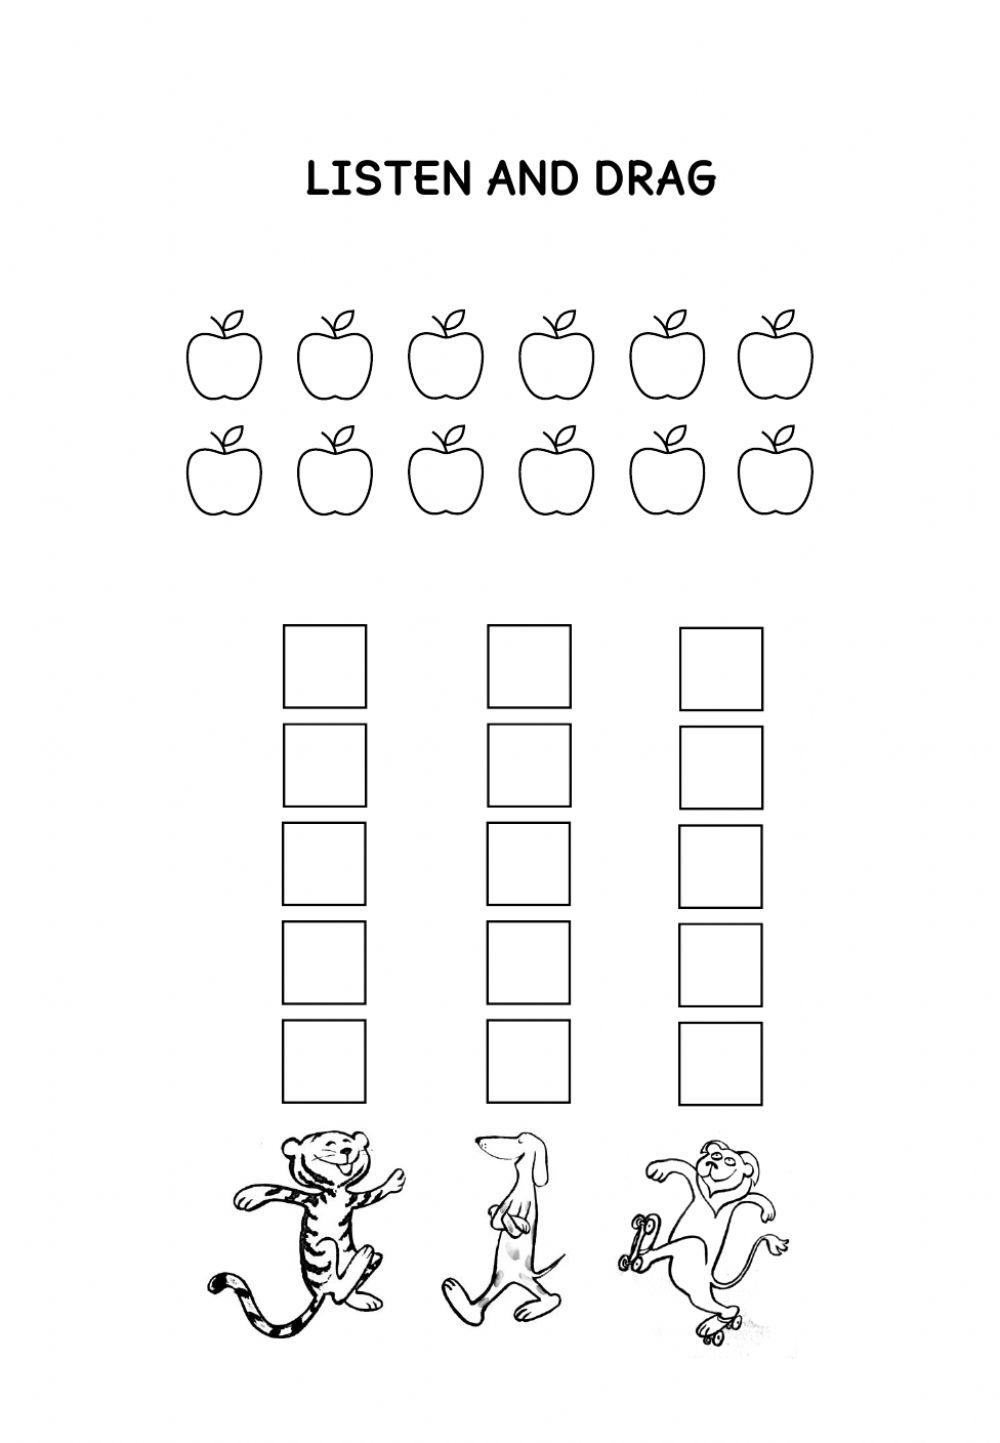 How many apples up on top?